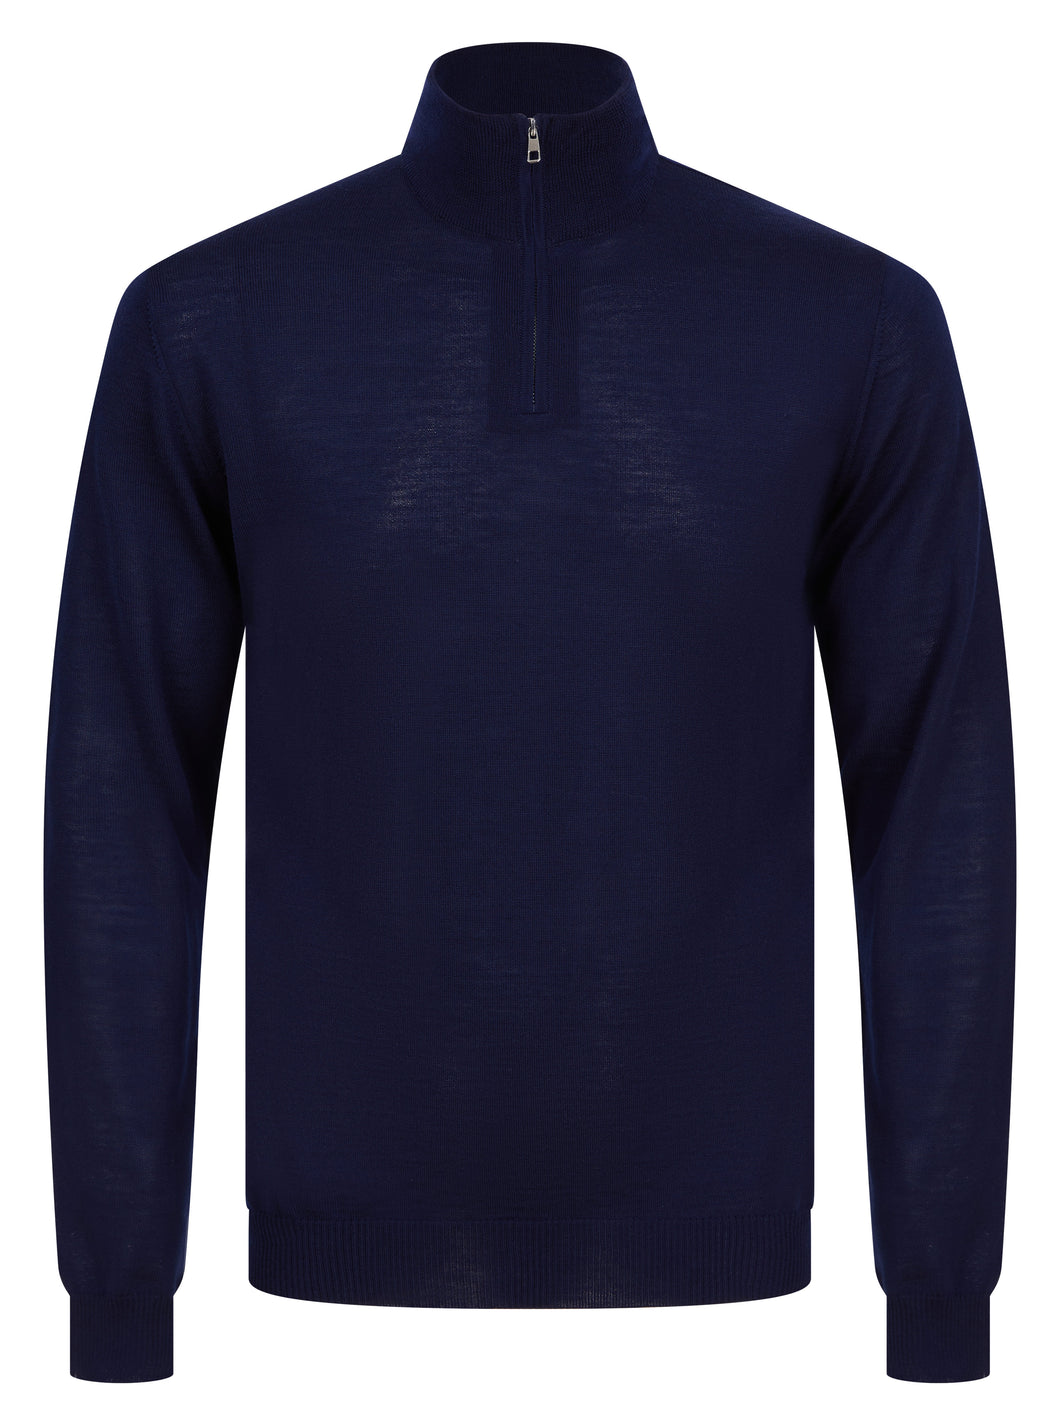 Oliver Sweeney Curragh 1/4 Zip Knit Navy